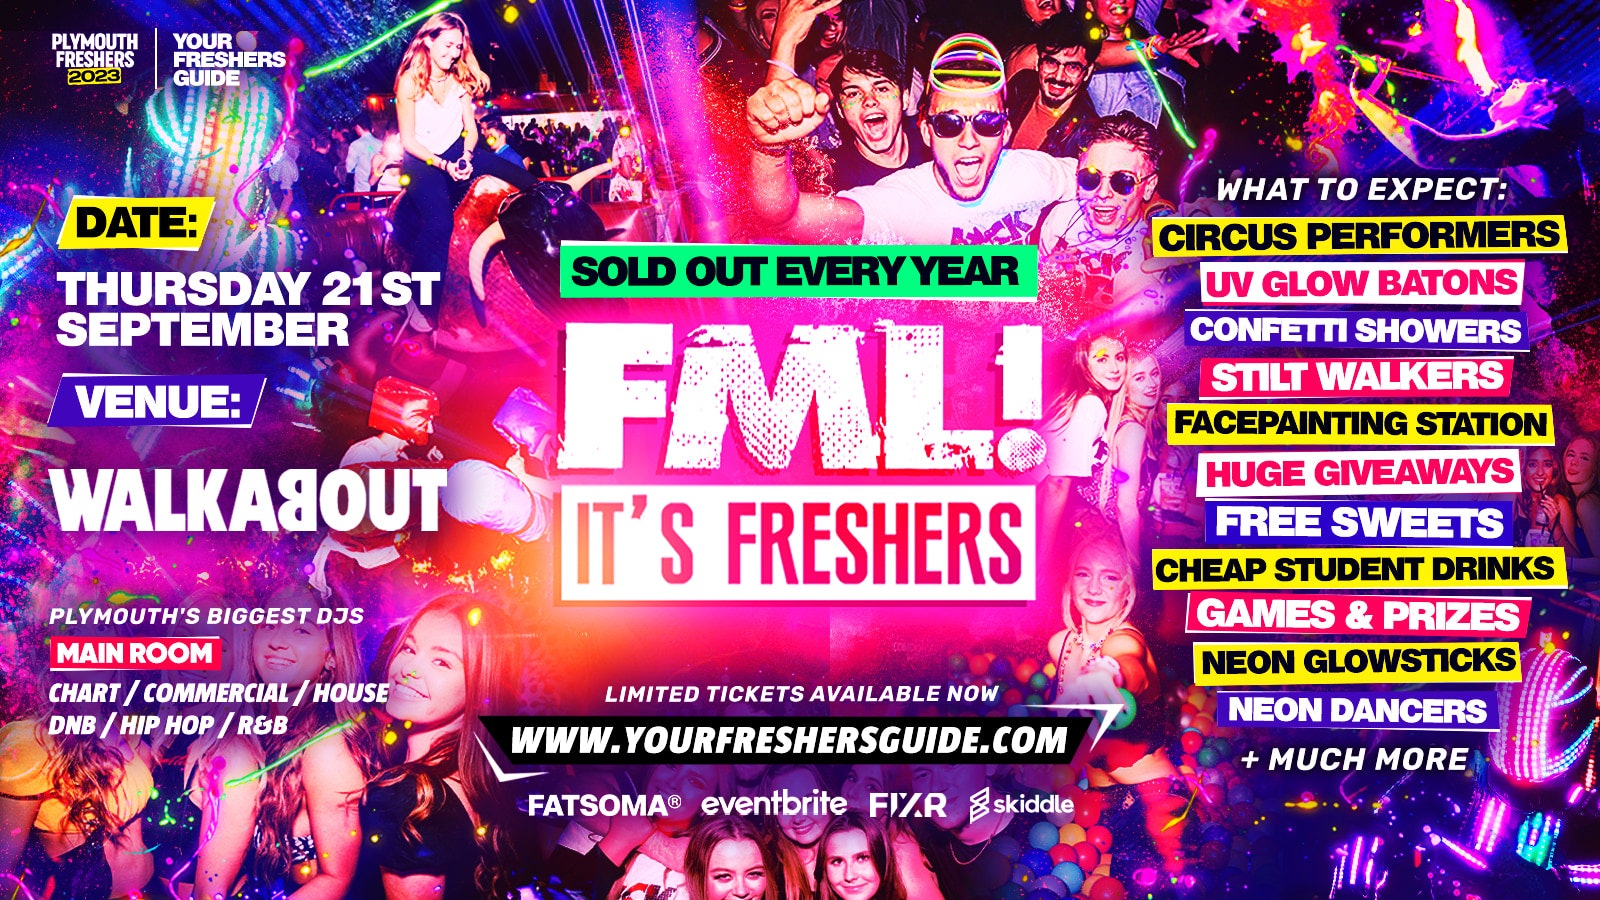 FML IT’S FRESHERS | Plymouth Freshers 2023 – TICKETS SELLING OUT FAST! 🔥